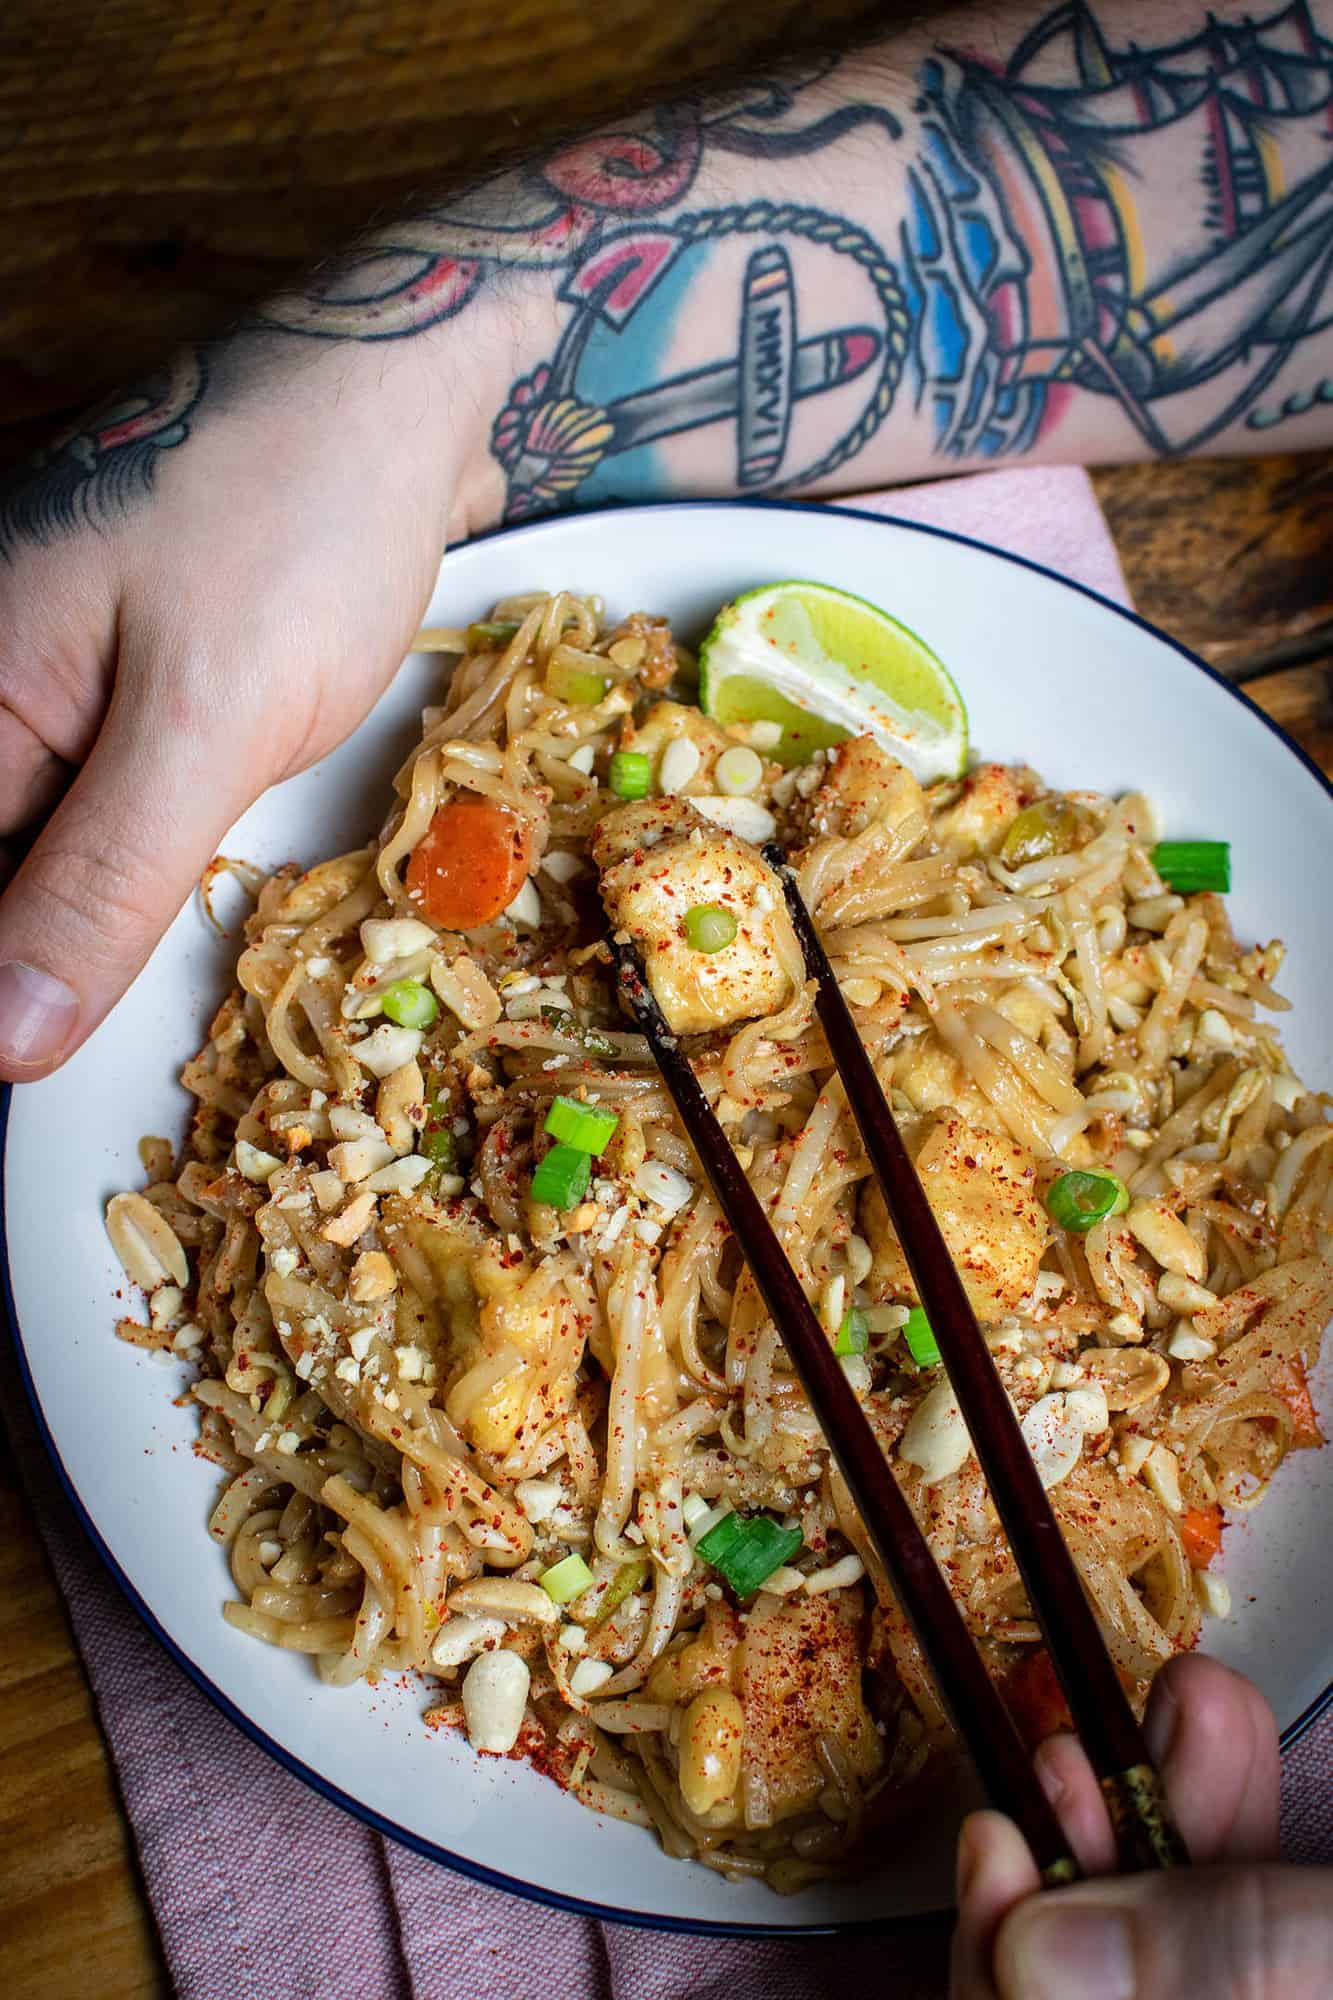 Easy vegan Pad Thai plated up with a tattooed arm holding the plate, and chopsticks holding a piece of tofu